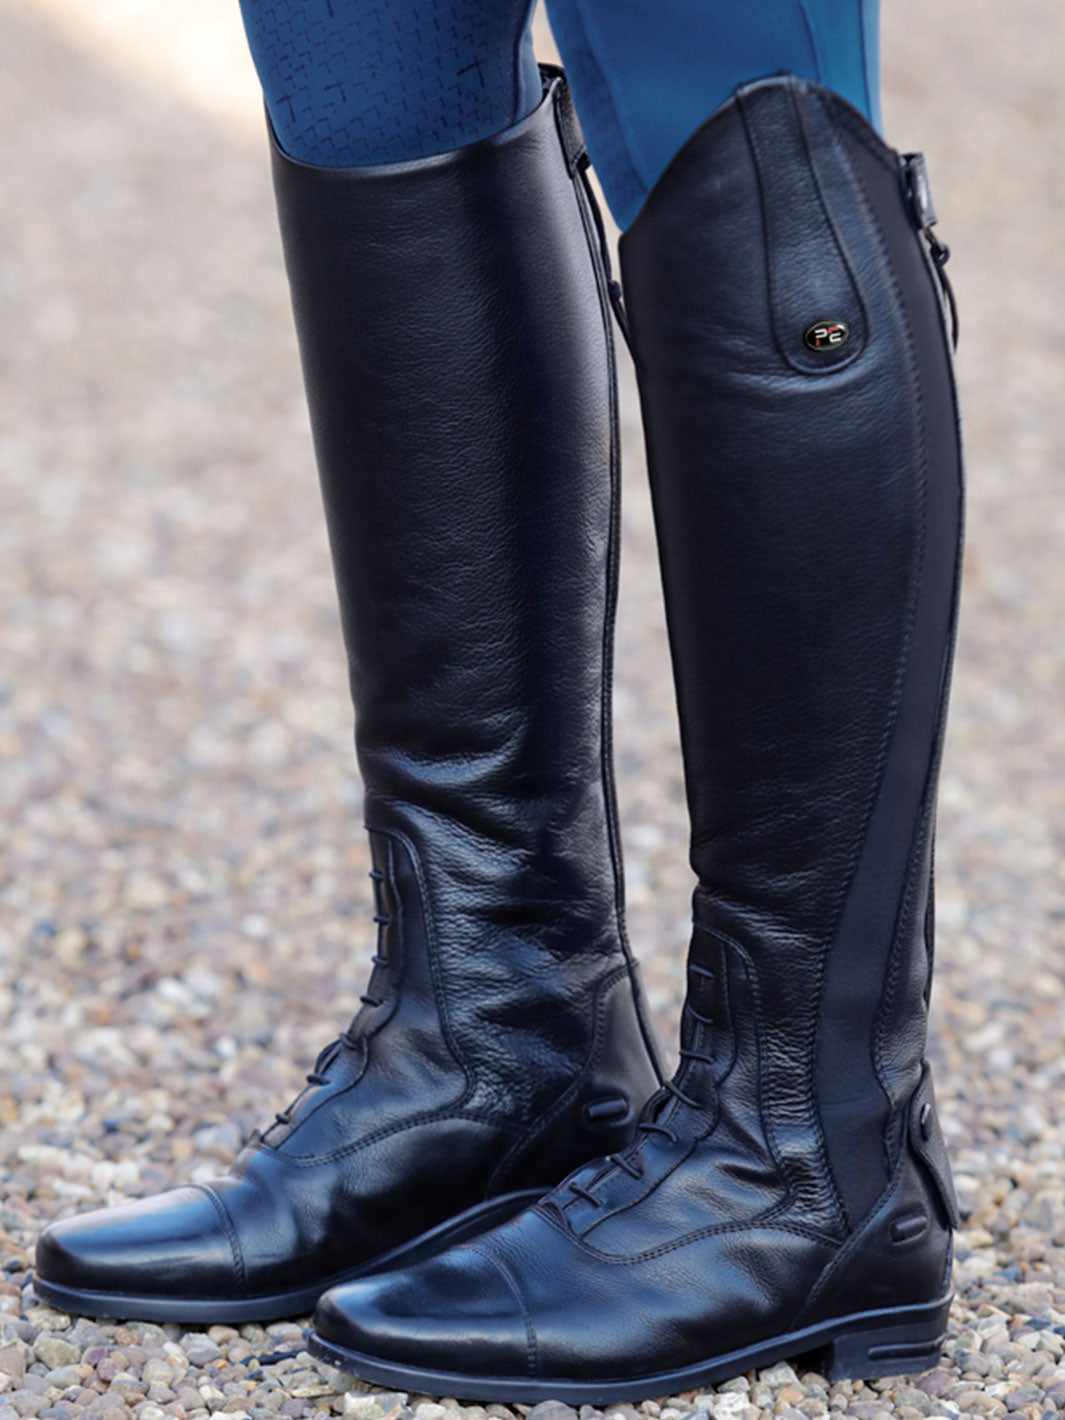 PE  Chisouri Ladies Long Leather Field Riding Boot